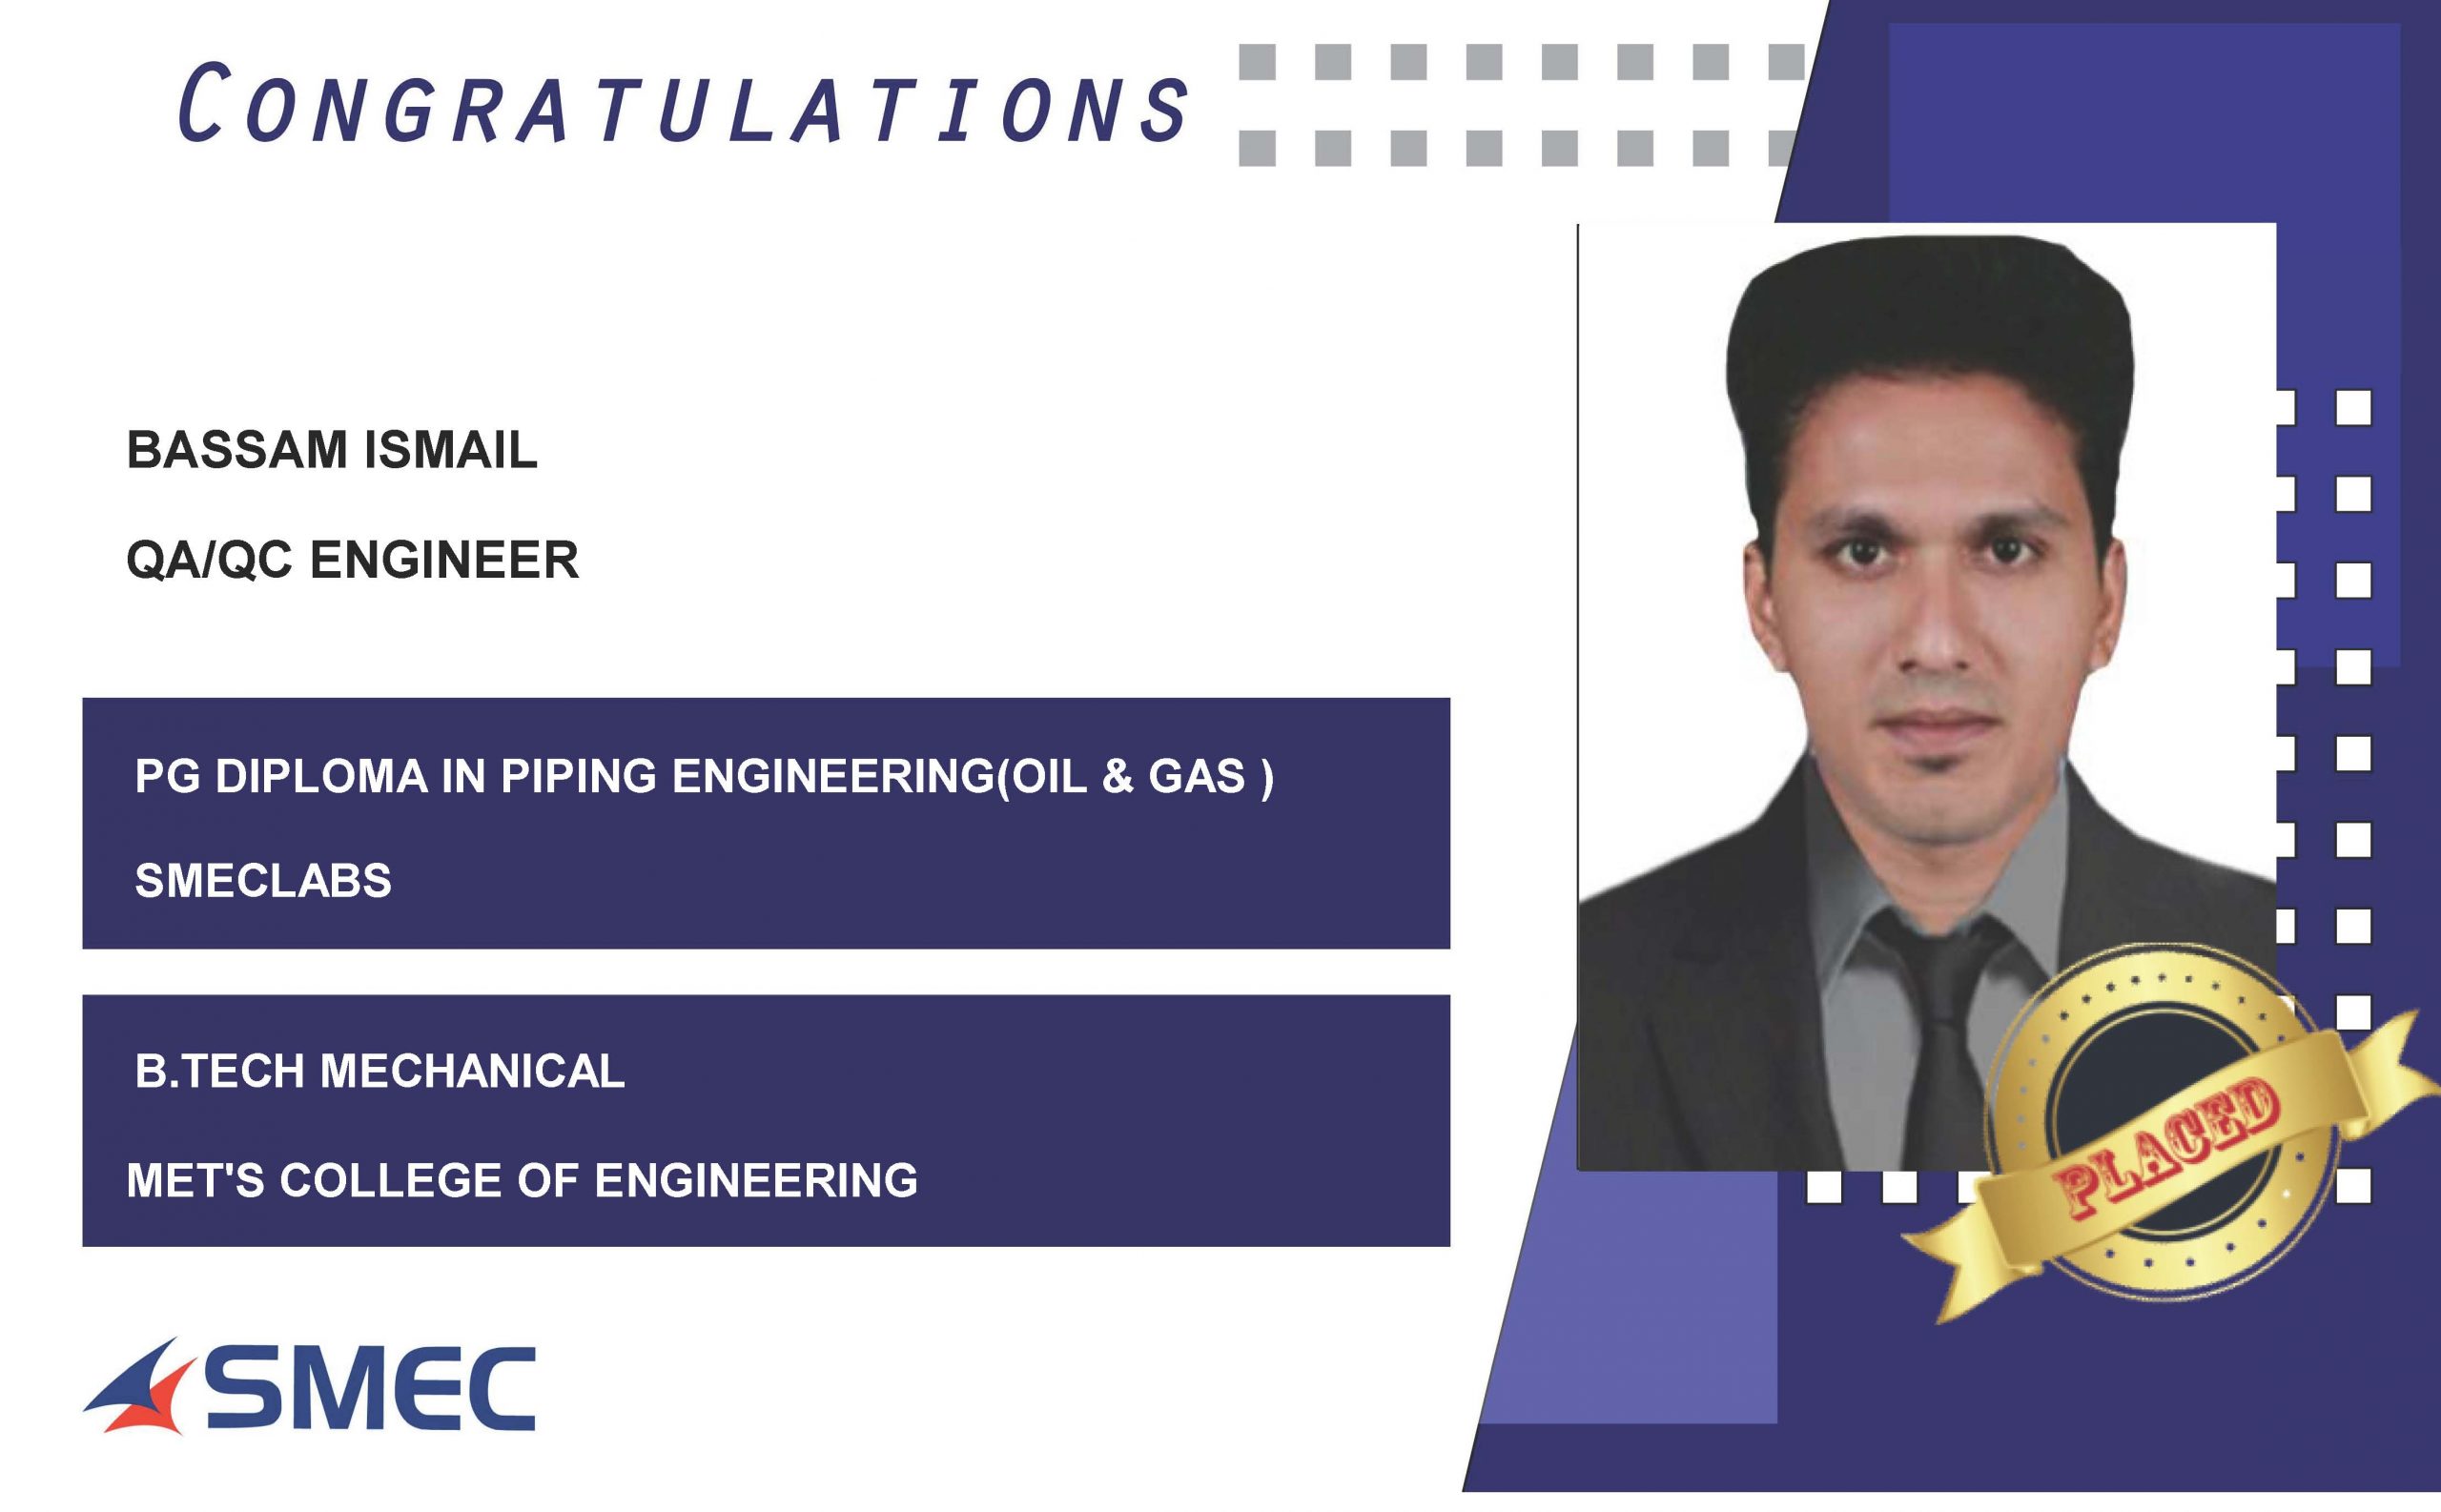 Bassam Ismail Placed Successfully as QA/QC Engineer